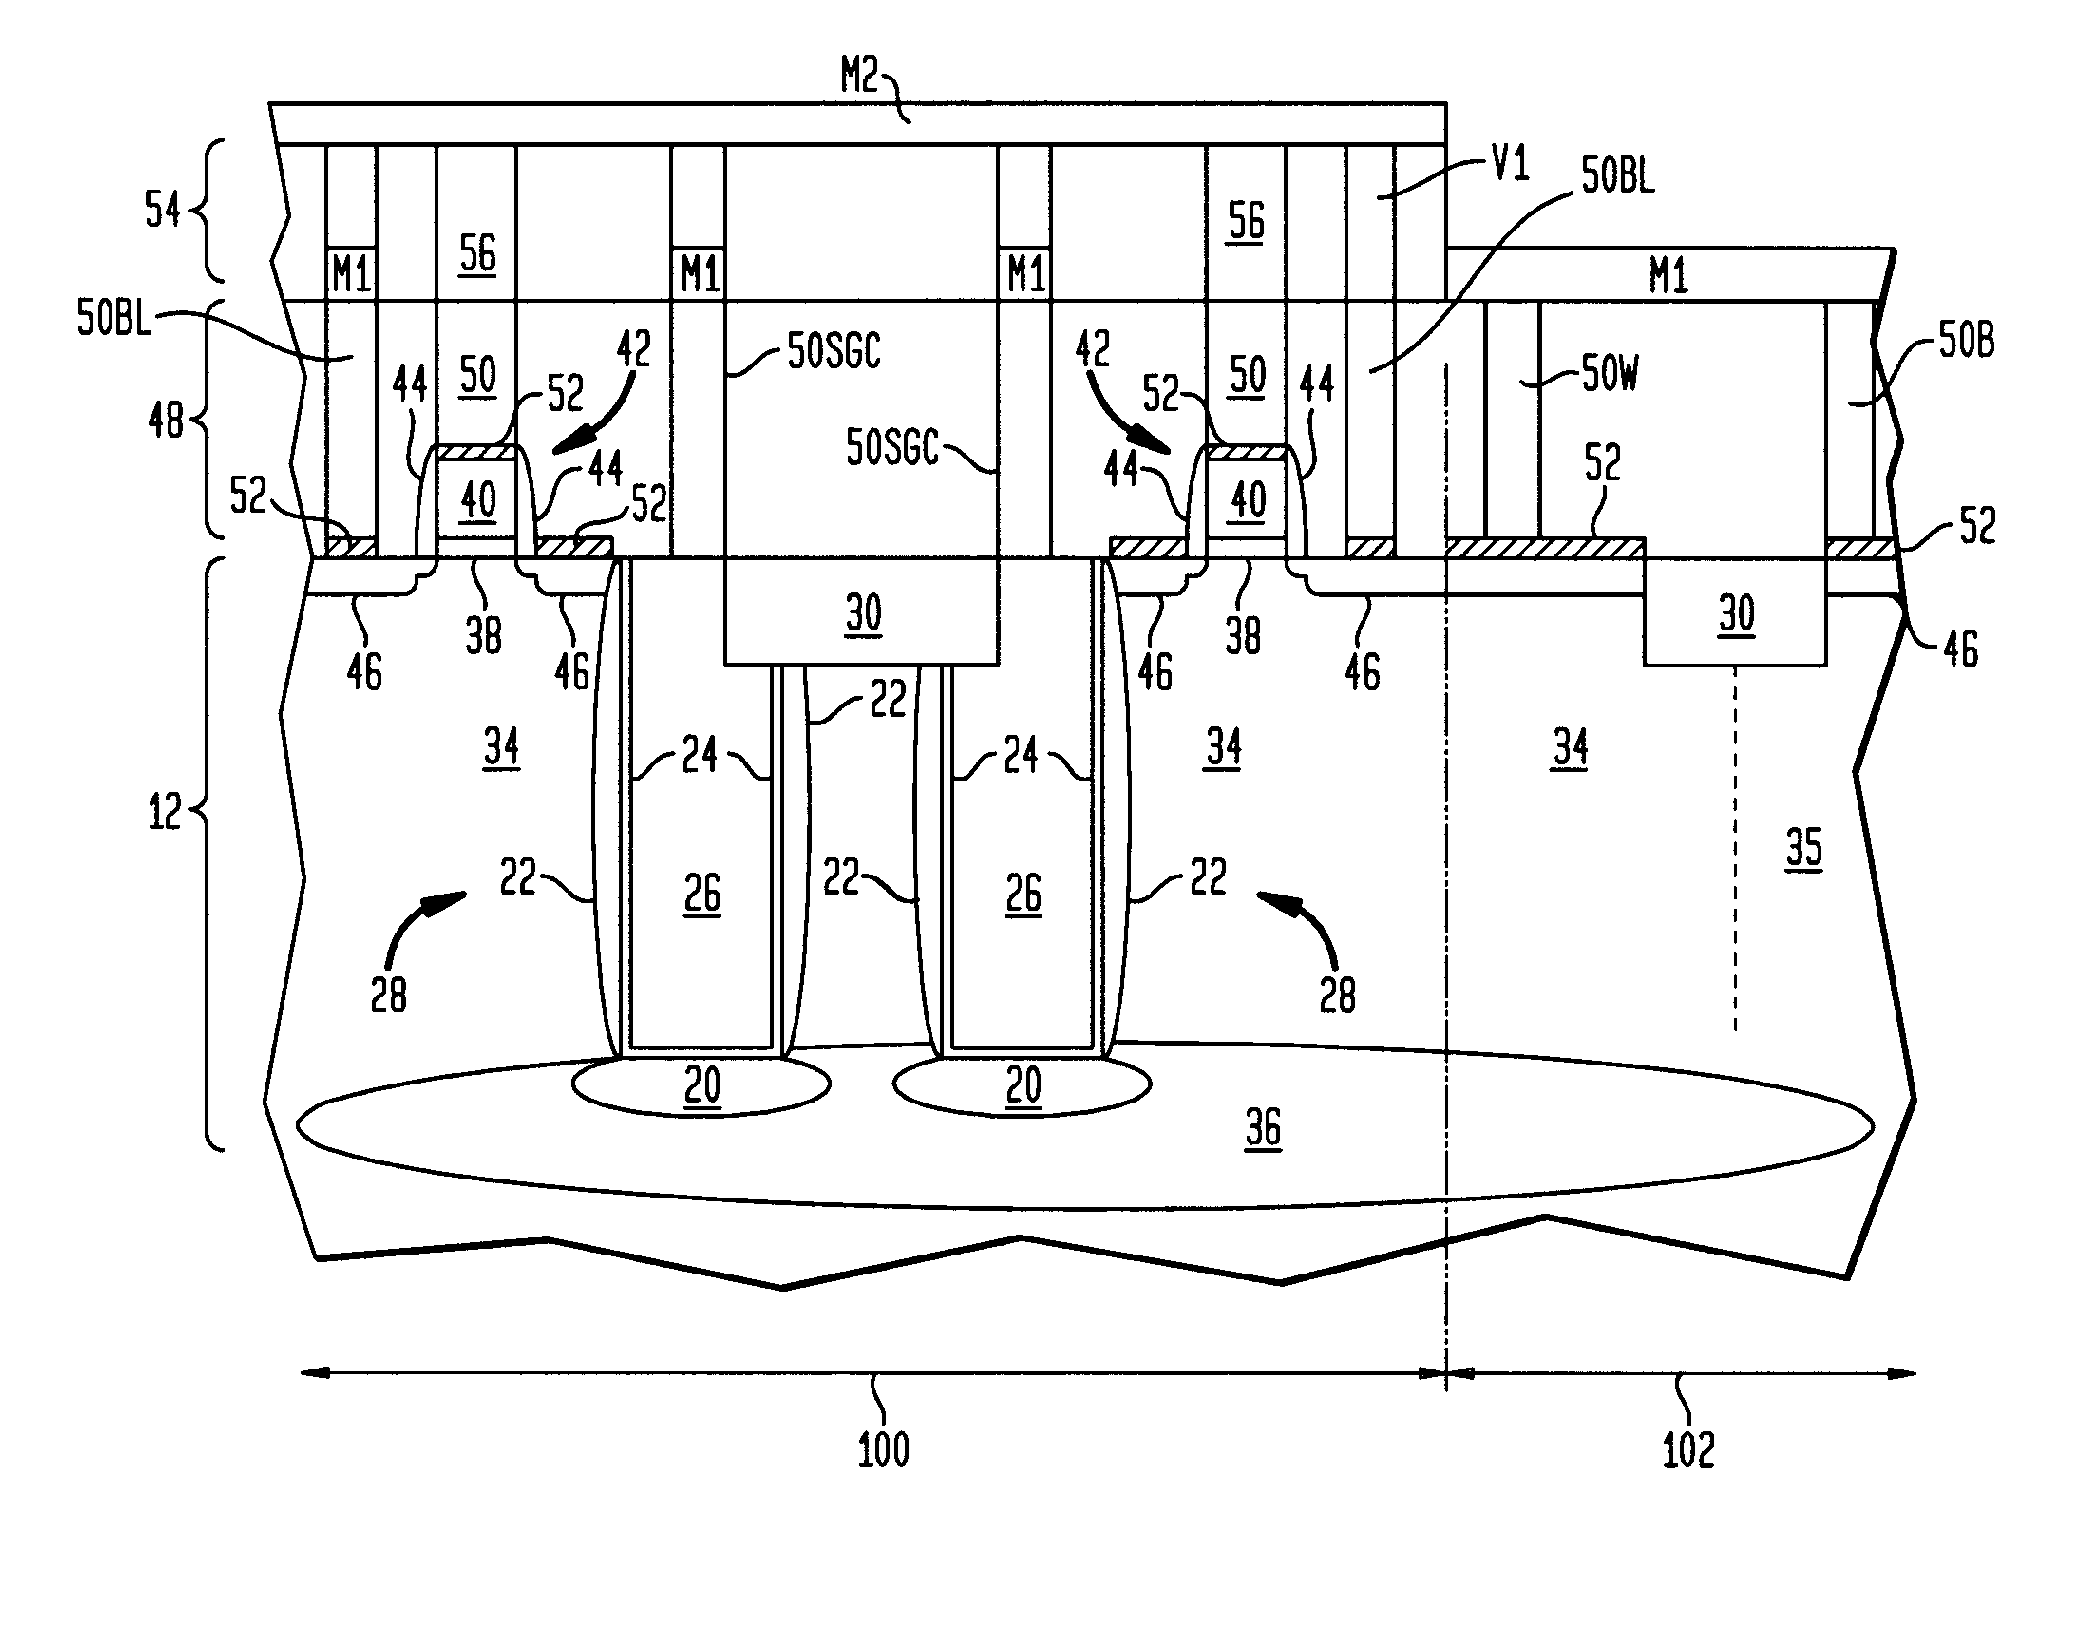 Structure and method of fabricating high-density, trench-based non-volatile random access sonos memory cells for soc applications